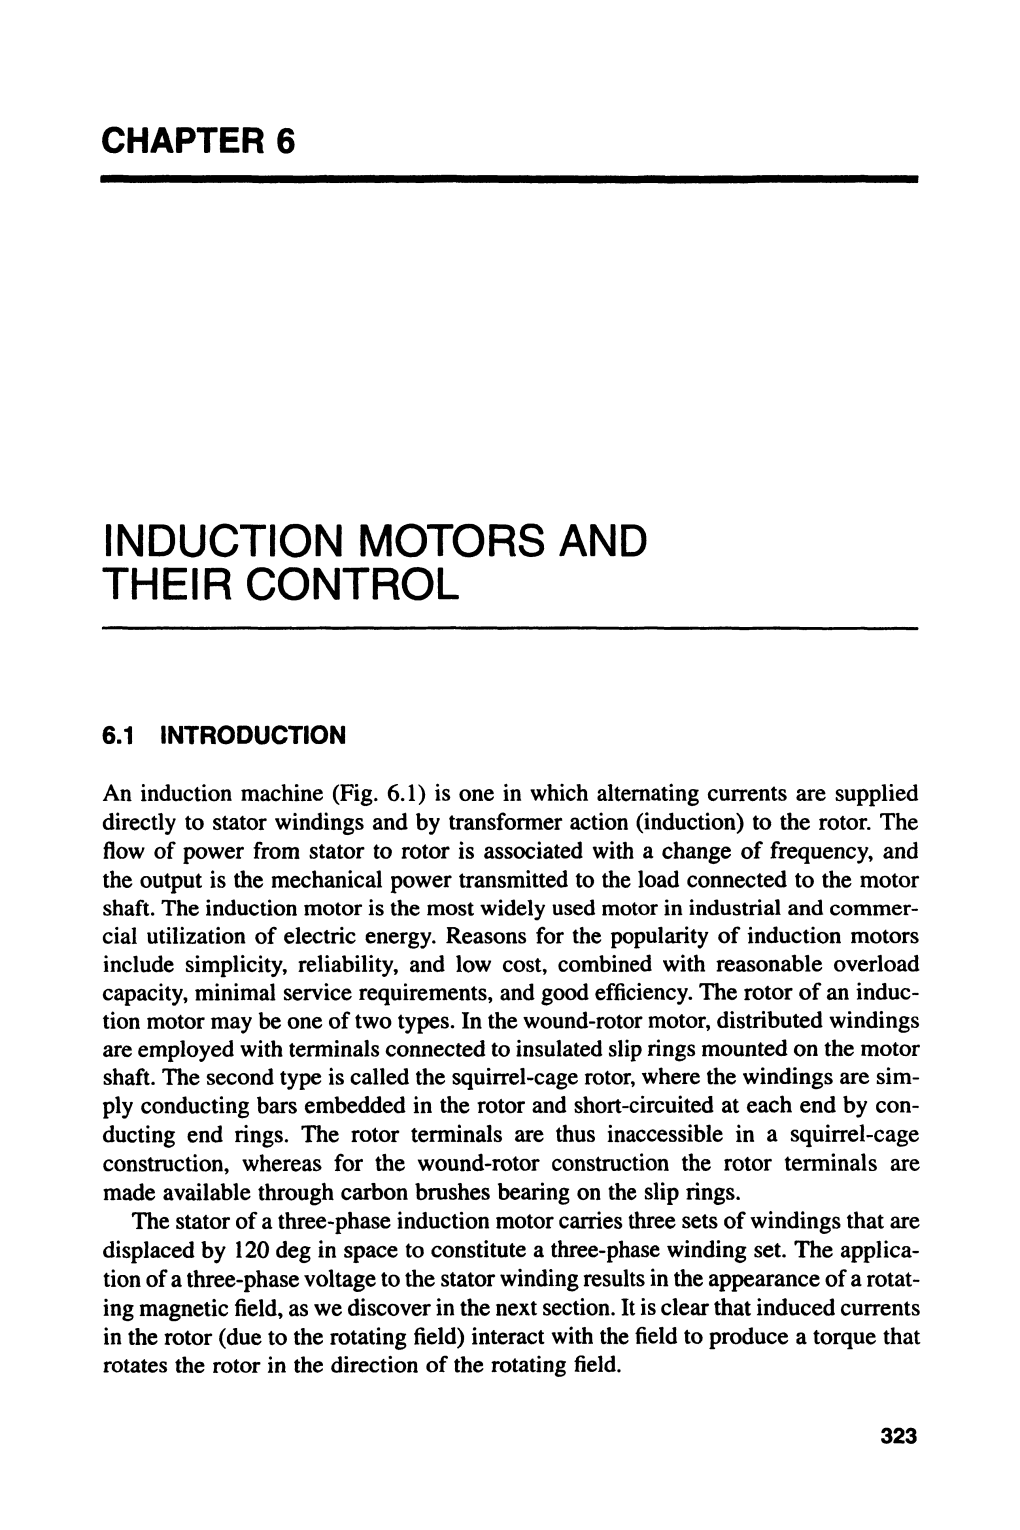 Induction Motors and Their Control